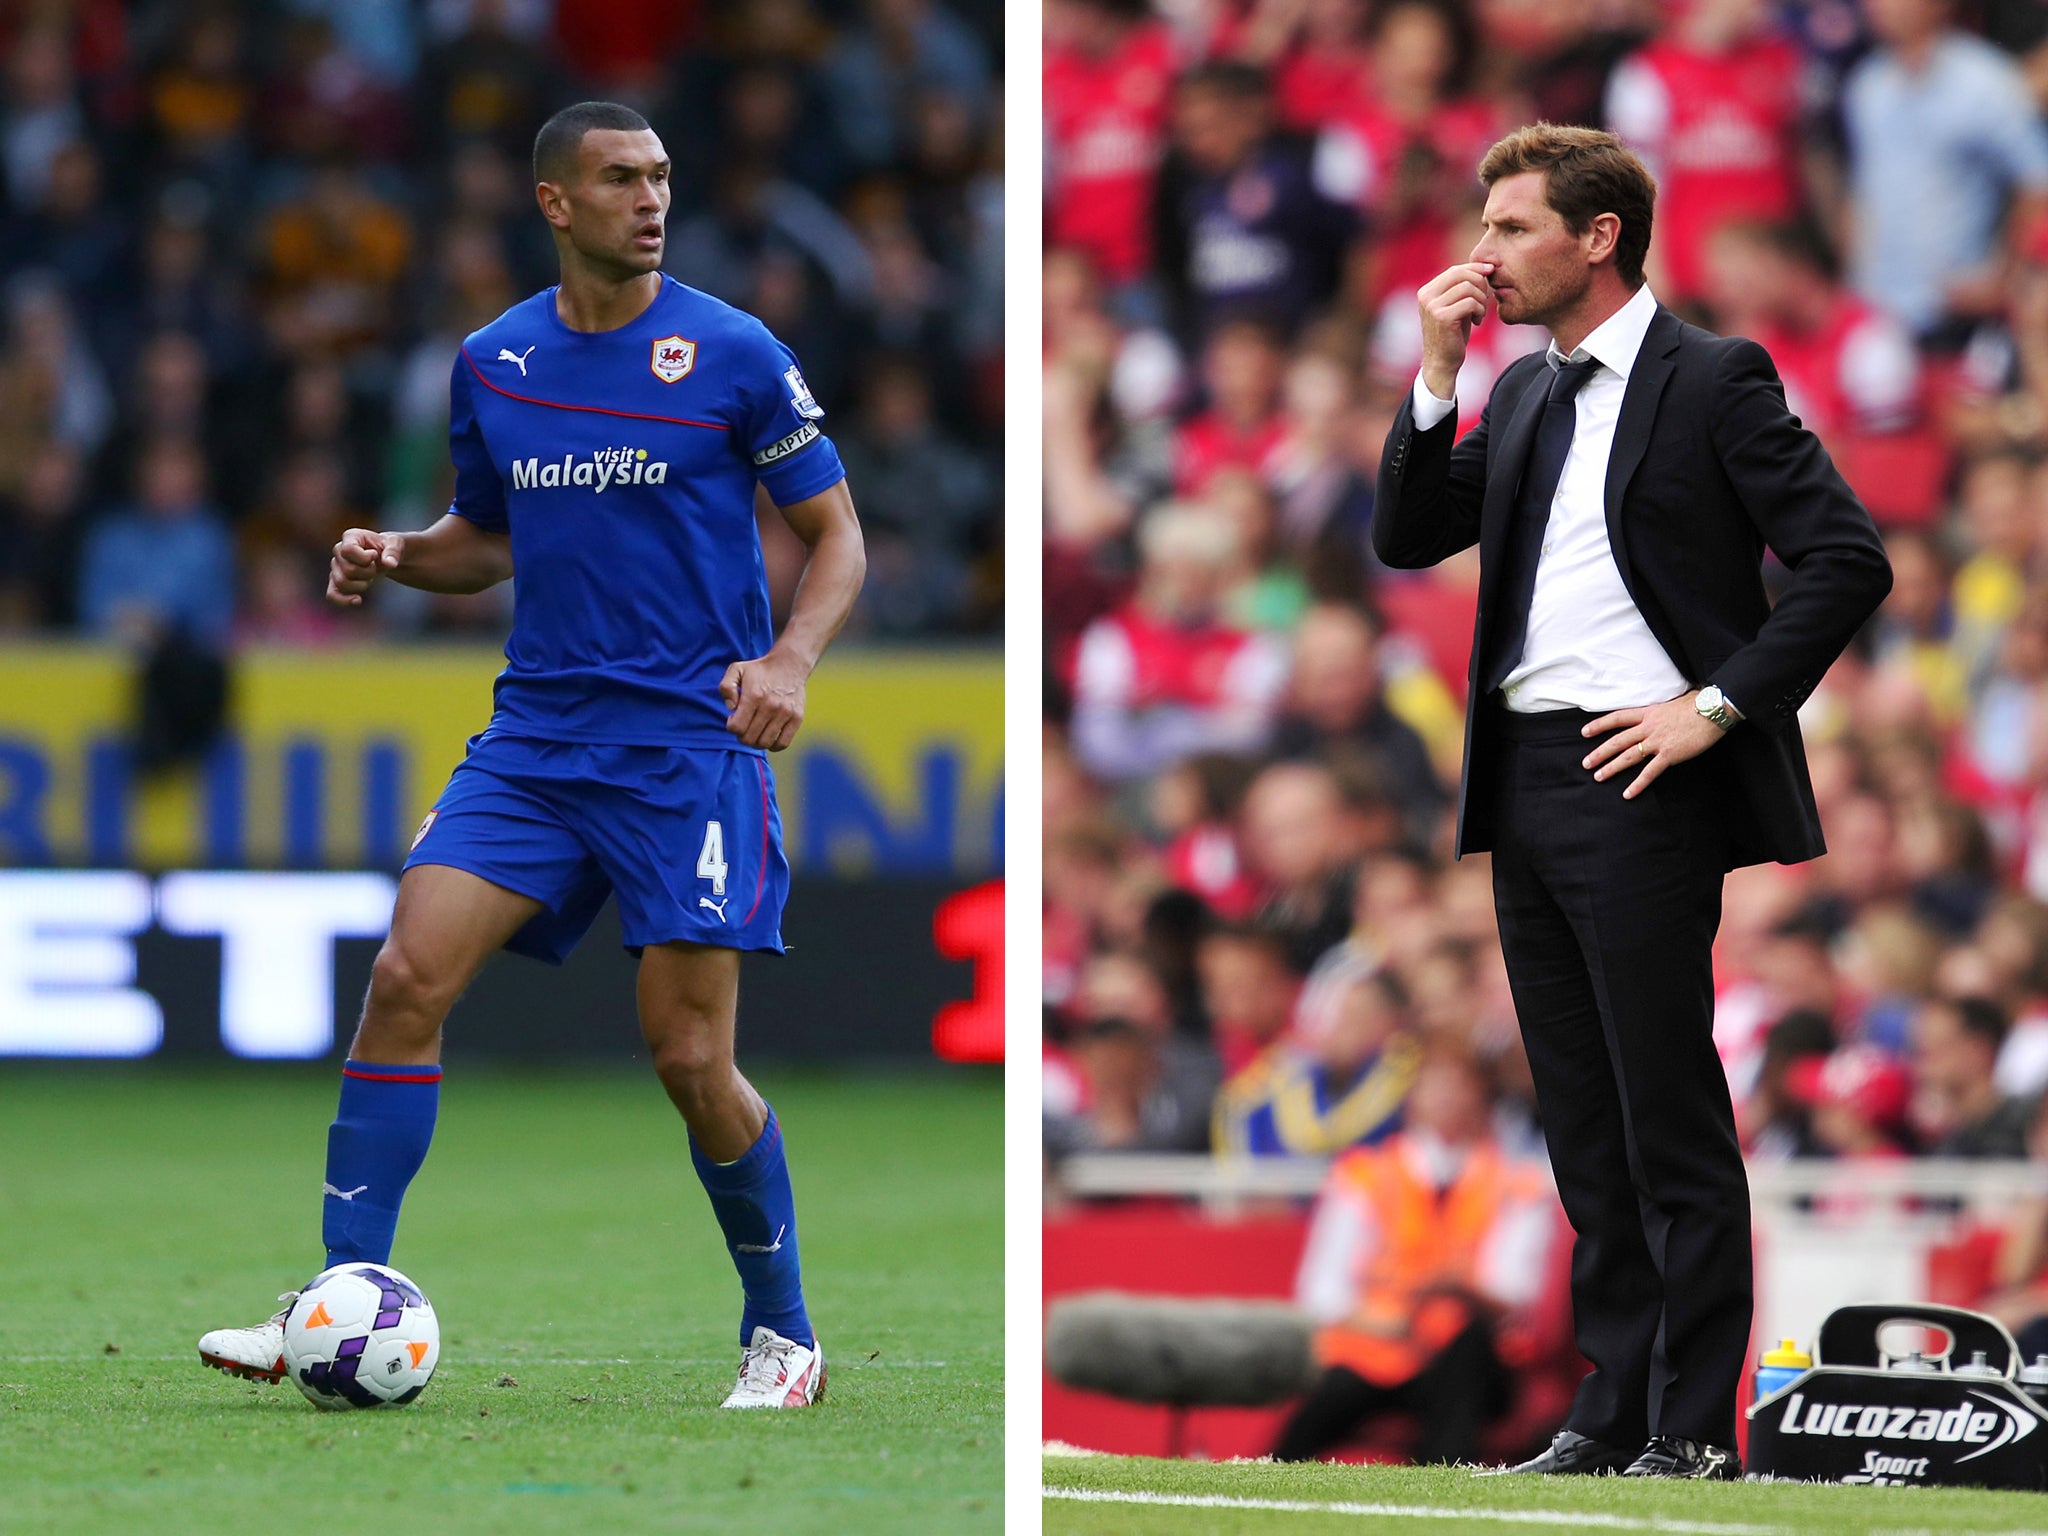 Steven Caulker was allowed to leave Tottenham and join Cardiff by Andre Villas-Boas